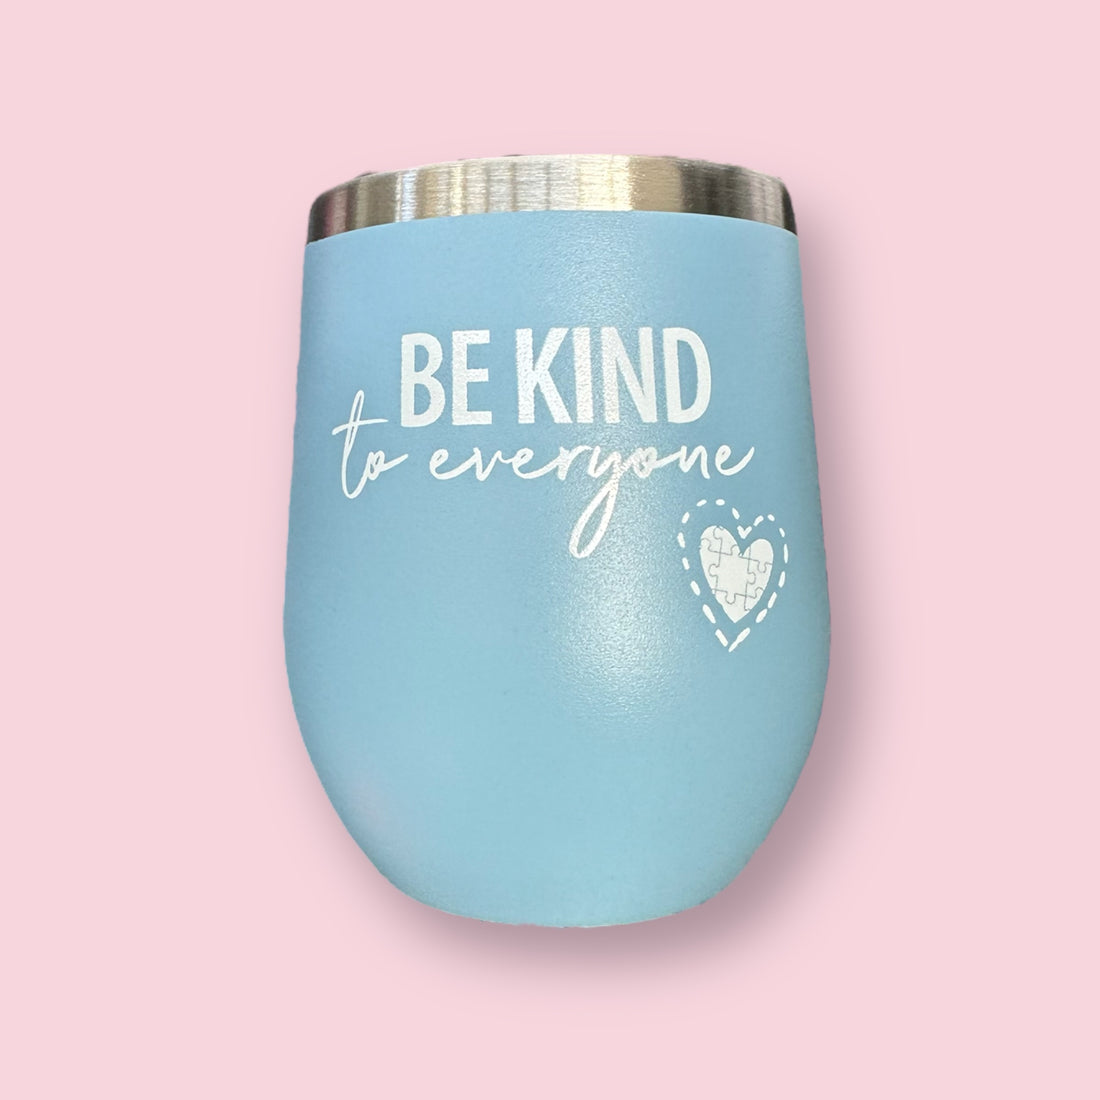 12 Oz Wine Tumbler with Decal - Be Kind to Everyone